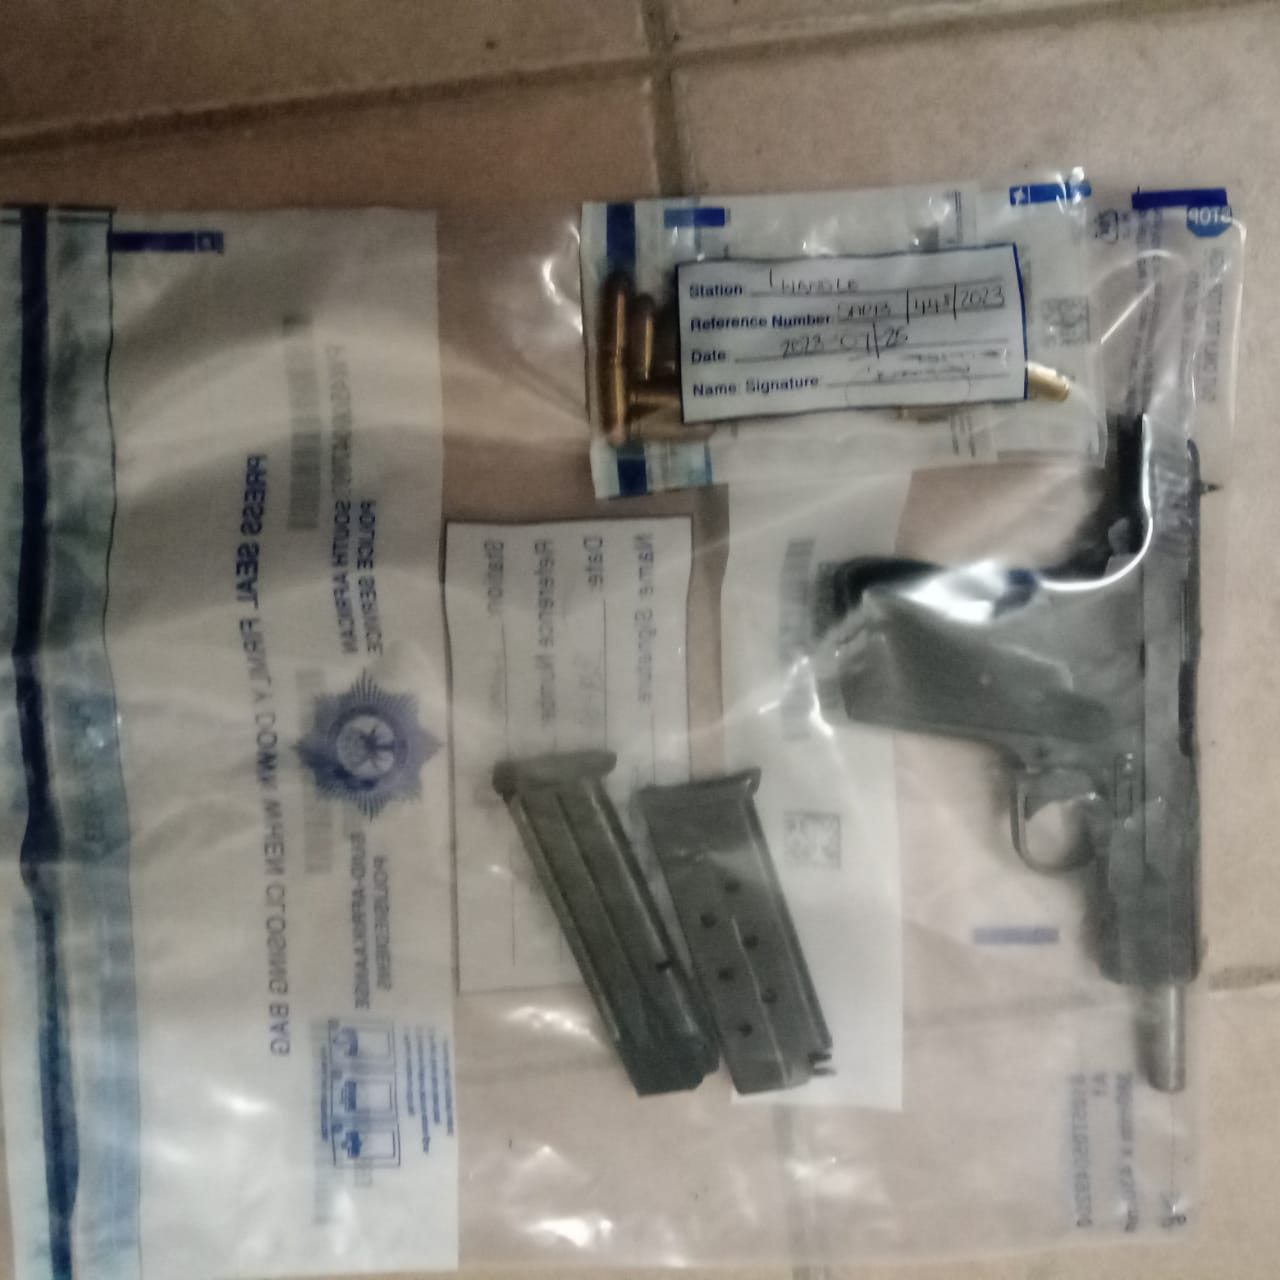 Suspects to appear in court for possession of unlicensed firearms